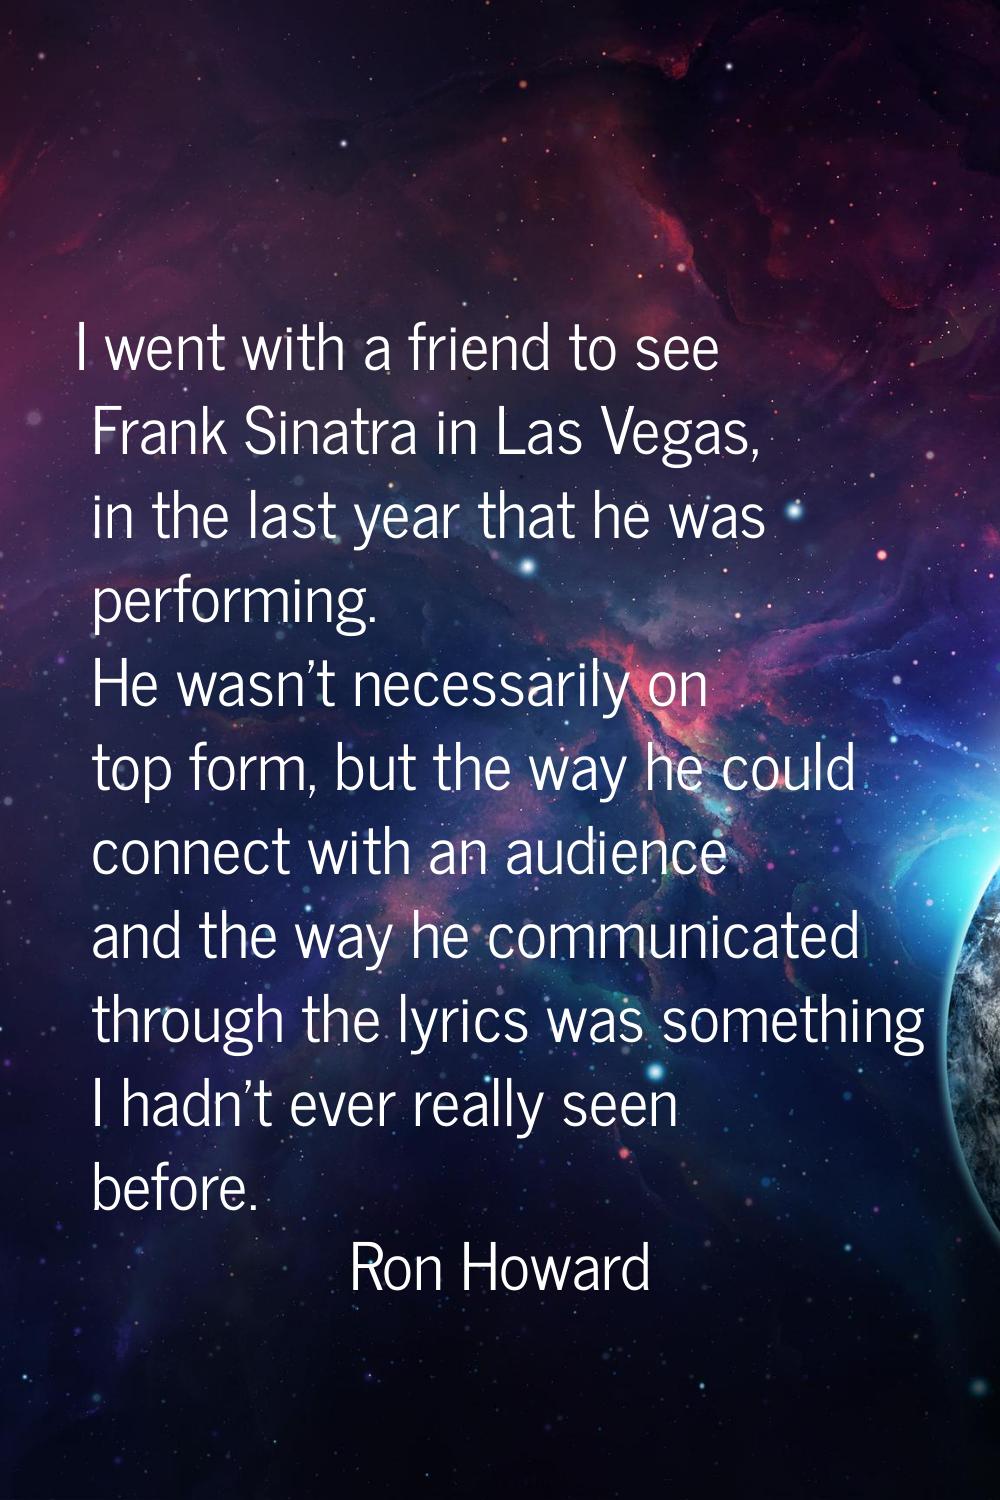 I went with a friend to see Frank Sinatra in Las Vegas, in the last year that he was performing. He